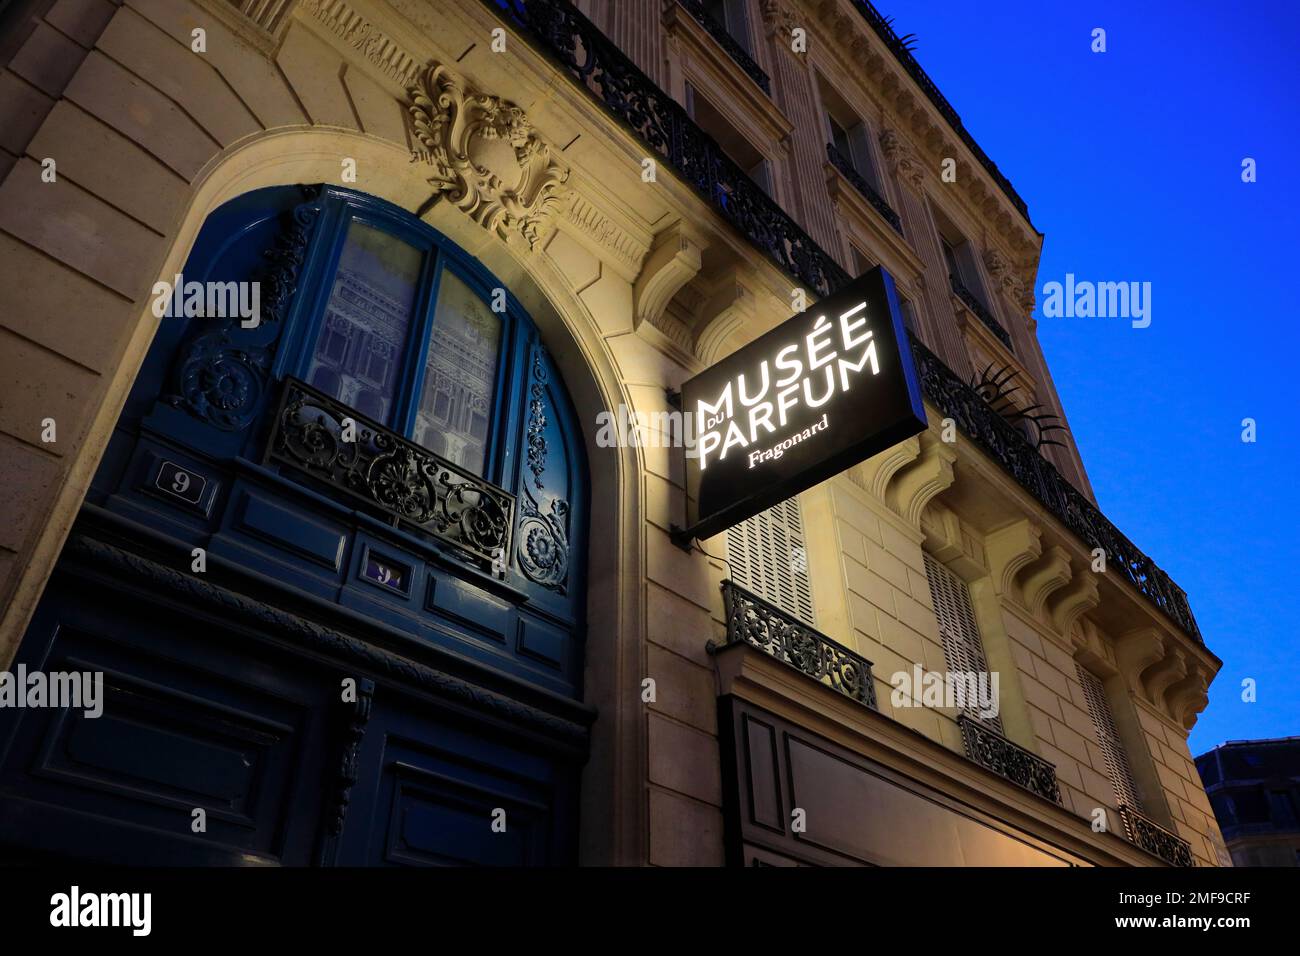 The night view of the sign of Musee du Parfum Fragonard over the entrance.Paris.France Stock Photo